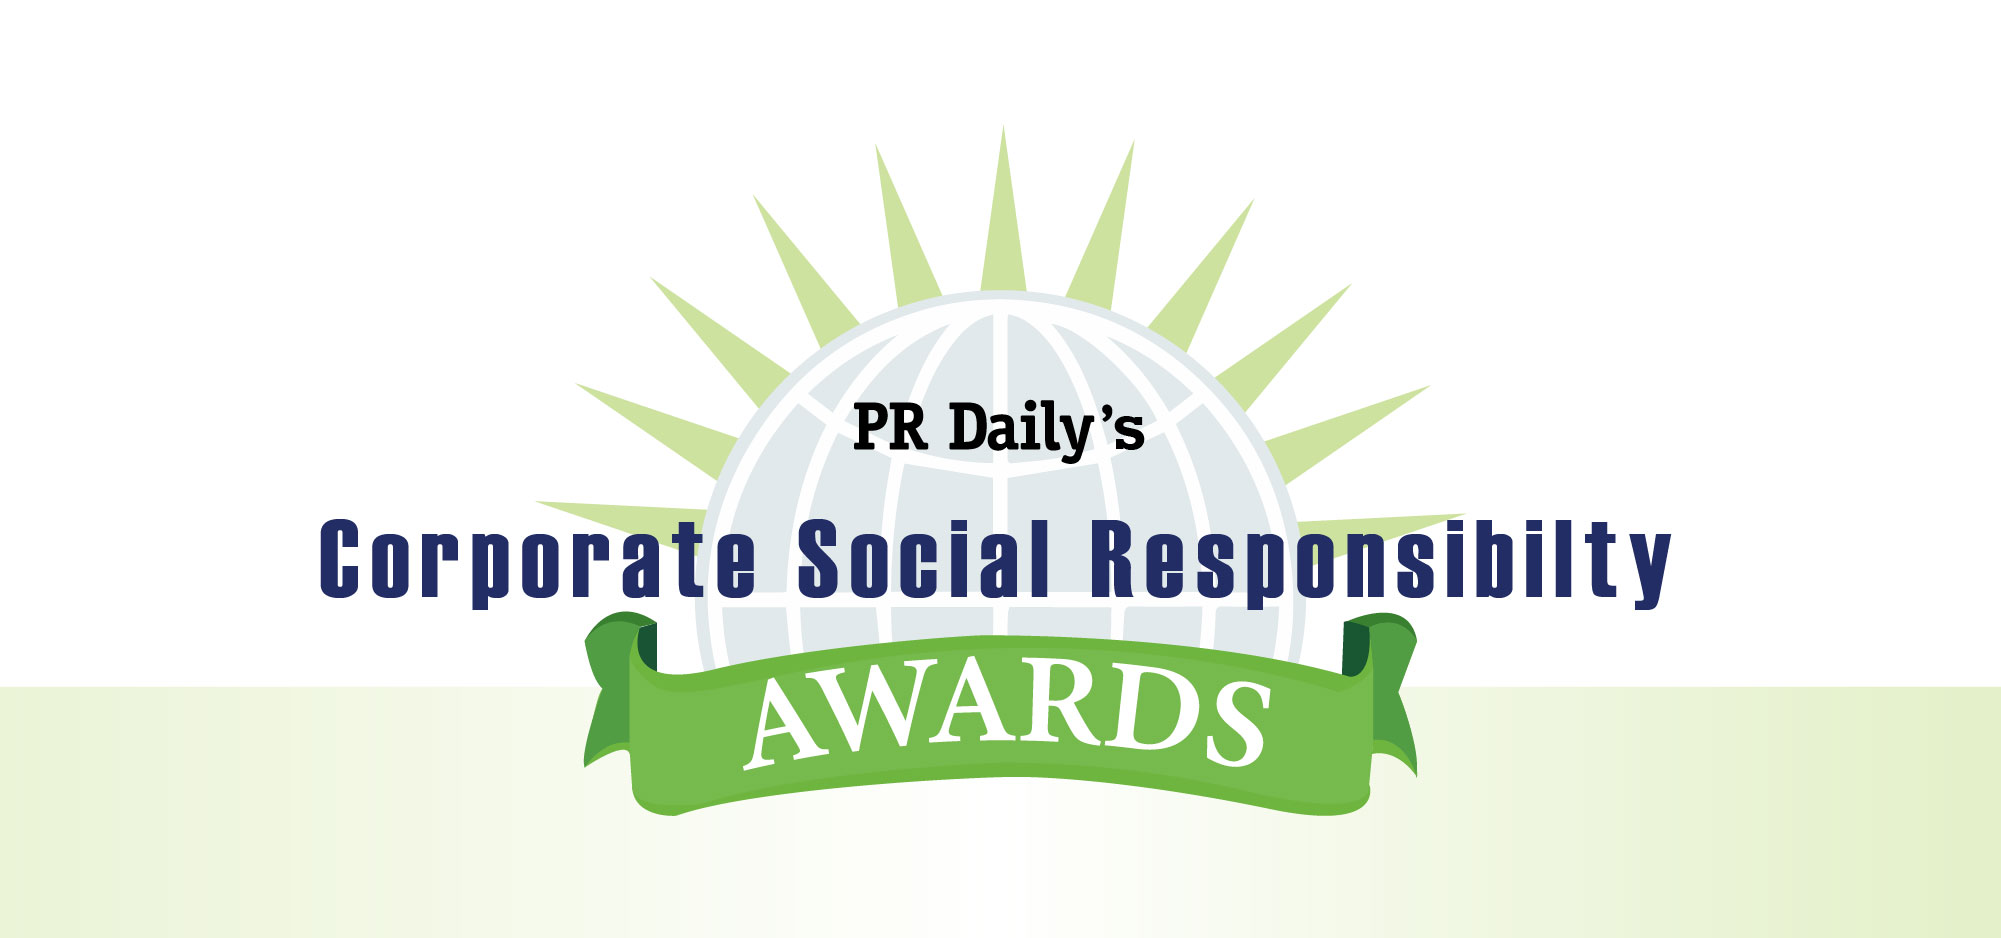 ragan awards honorable mention recipient of PR Daily’s Corporate Social Responsibility Awards in the Engagement & Communications category for its #OneMMS volunteer campaign mms holdings pharmaceutical cro csr services vendor consultants